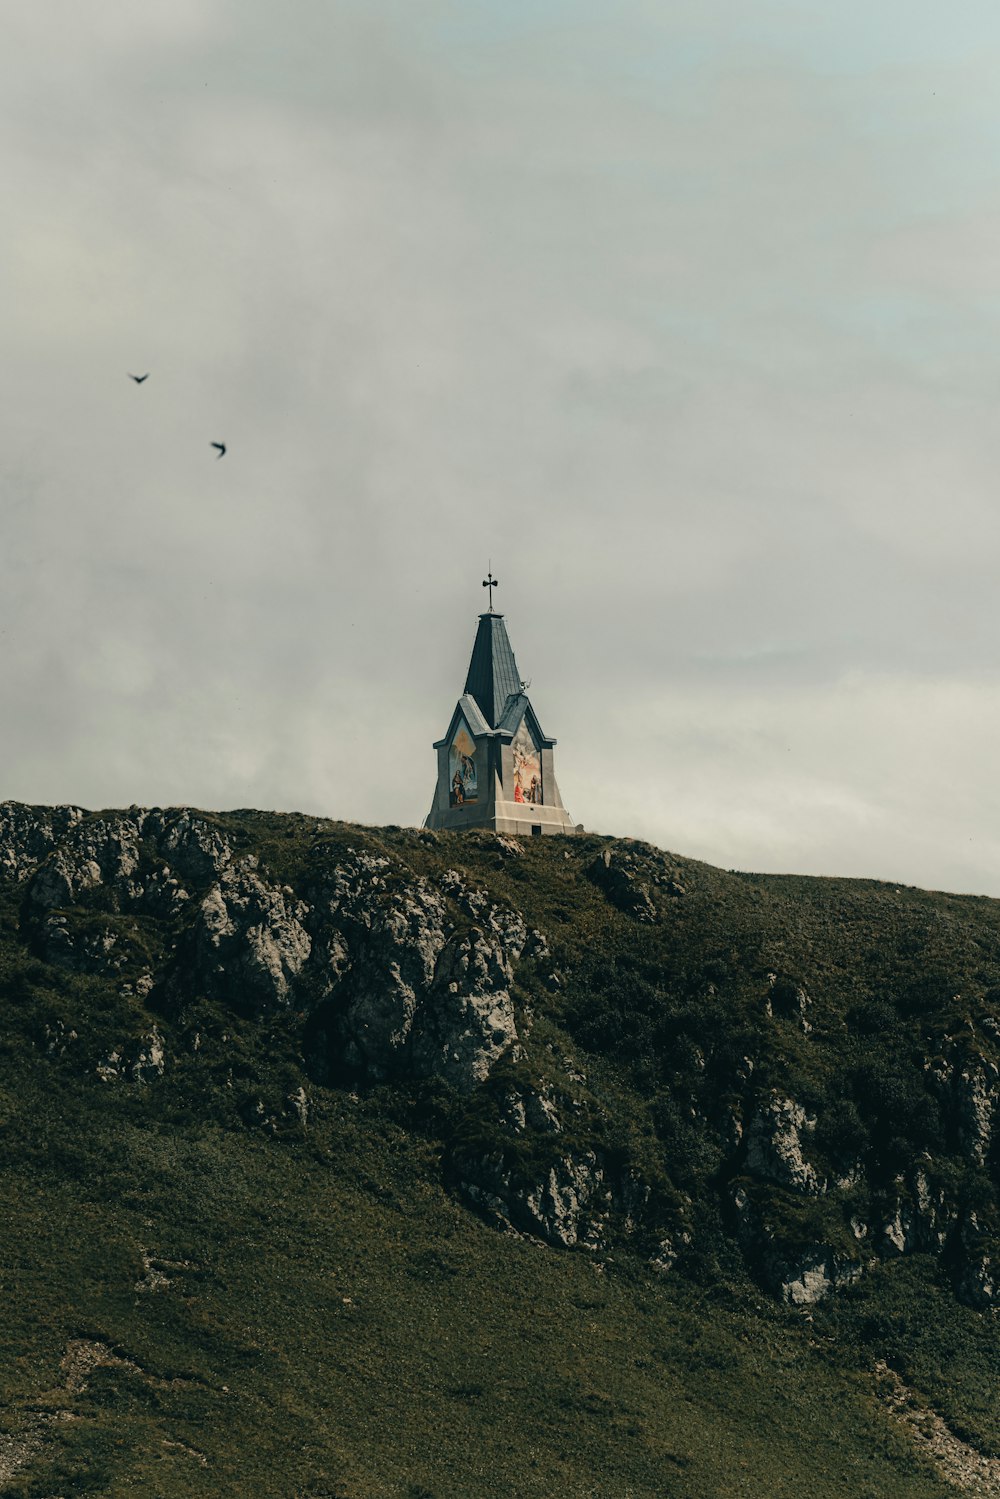 a church on a hill with a bird flying by